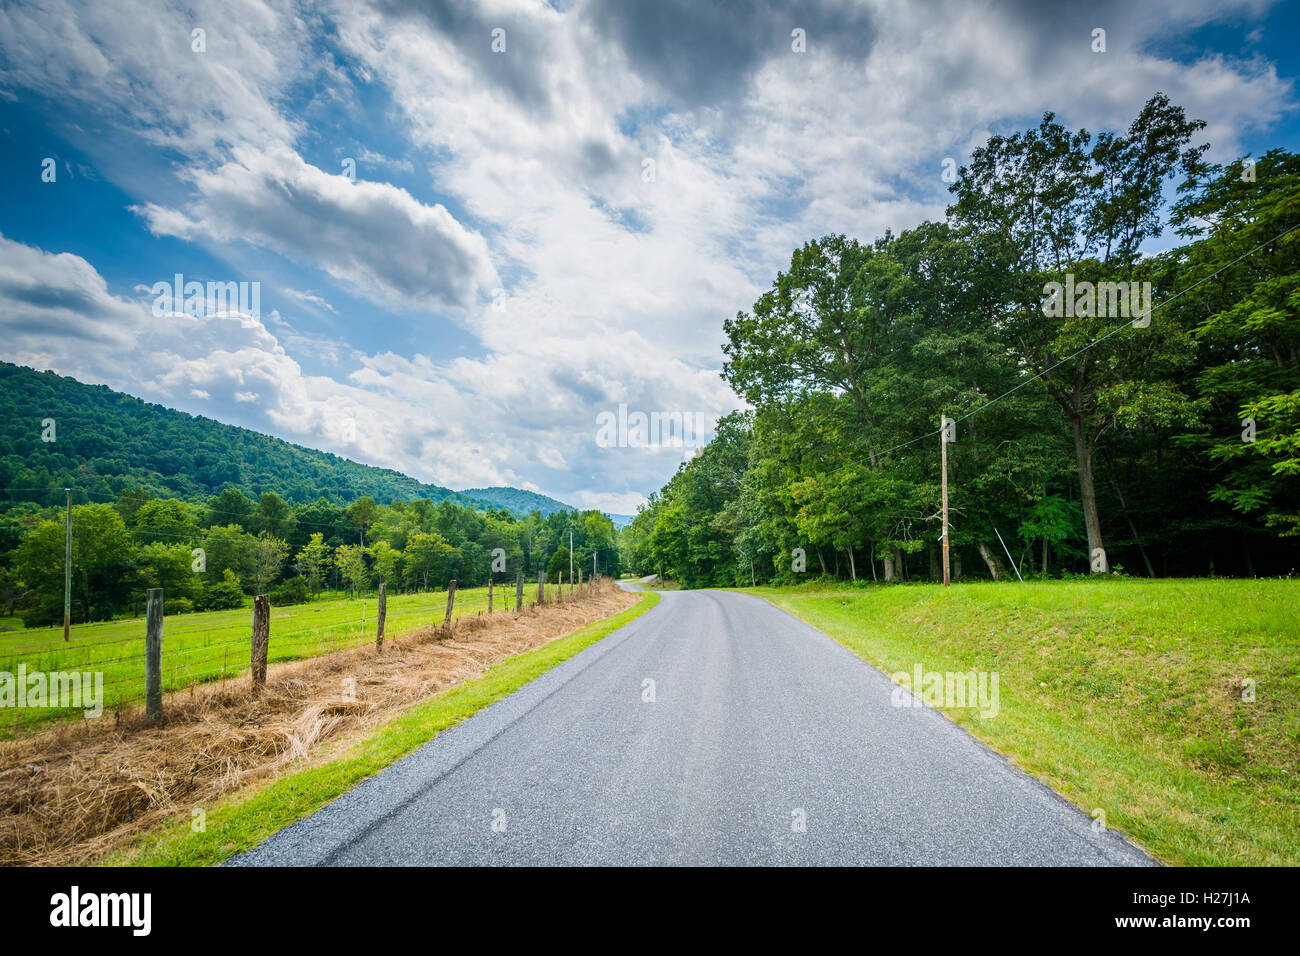 Country road in the rural Shenandoah Valley, Virginia. Stock Photo